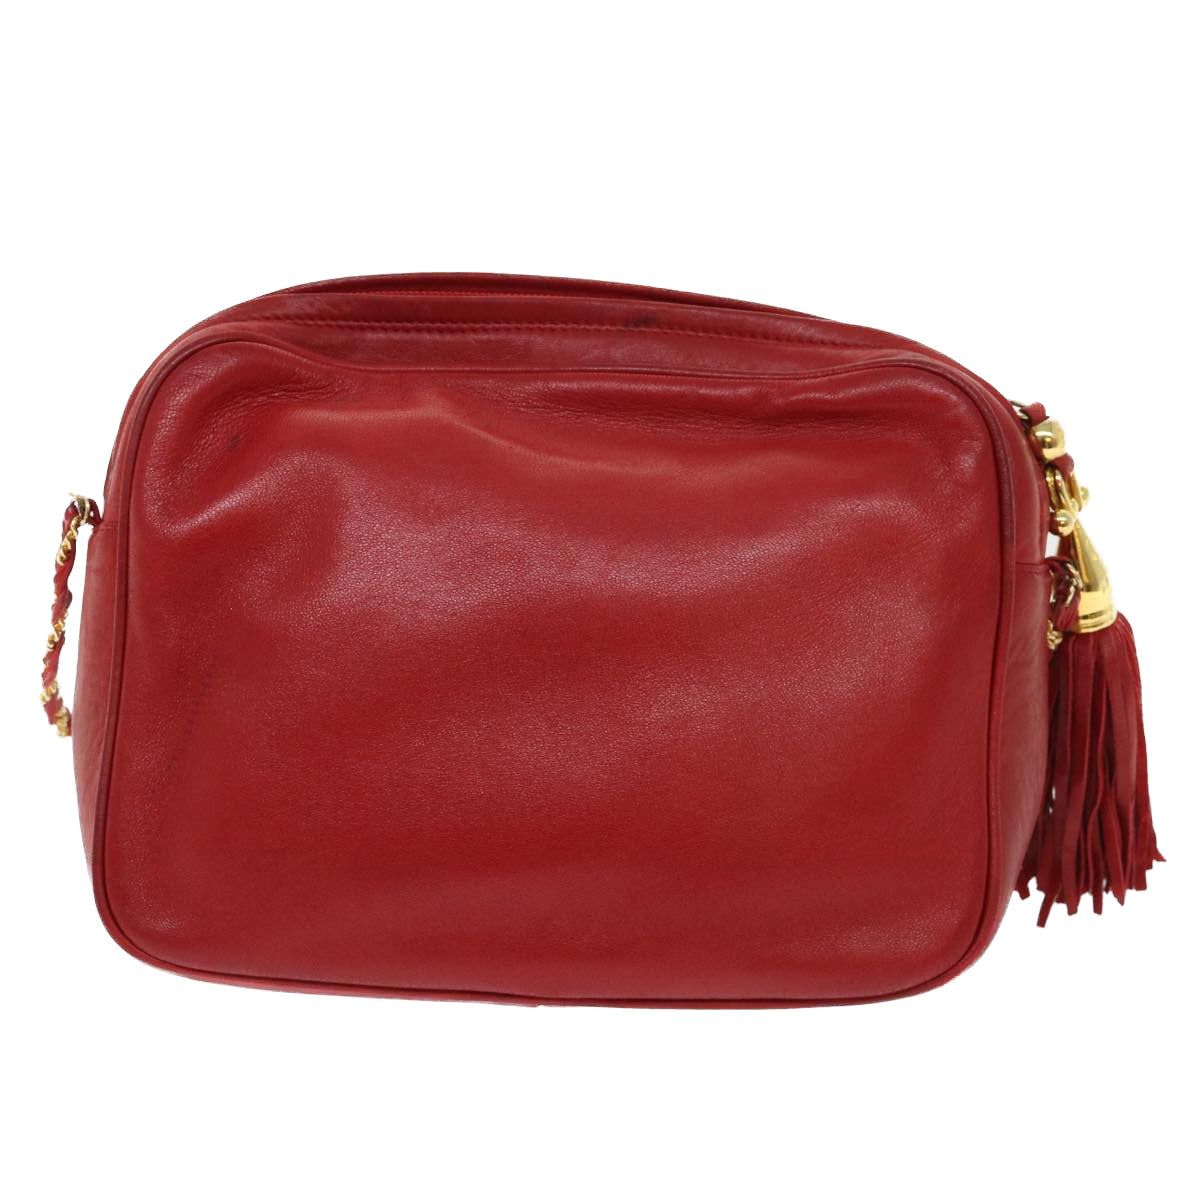 BALLY Chain Shoulder Bag Leather Red Auth yb317 - 0